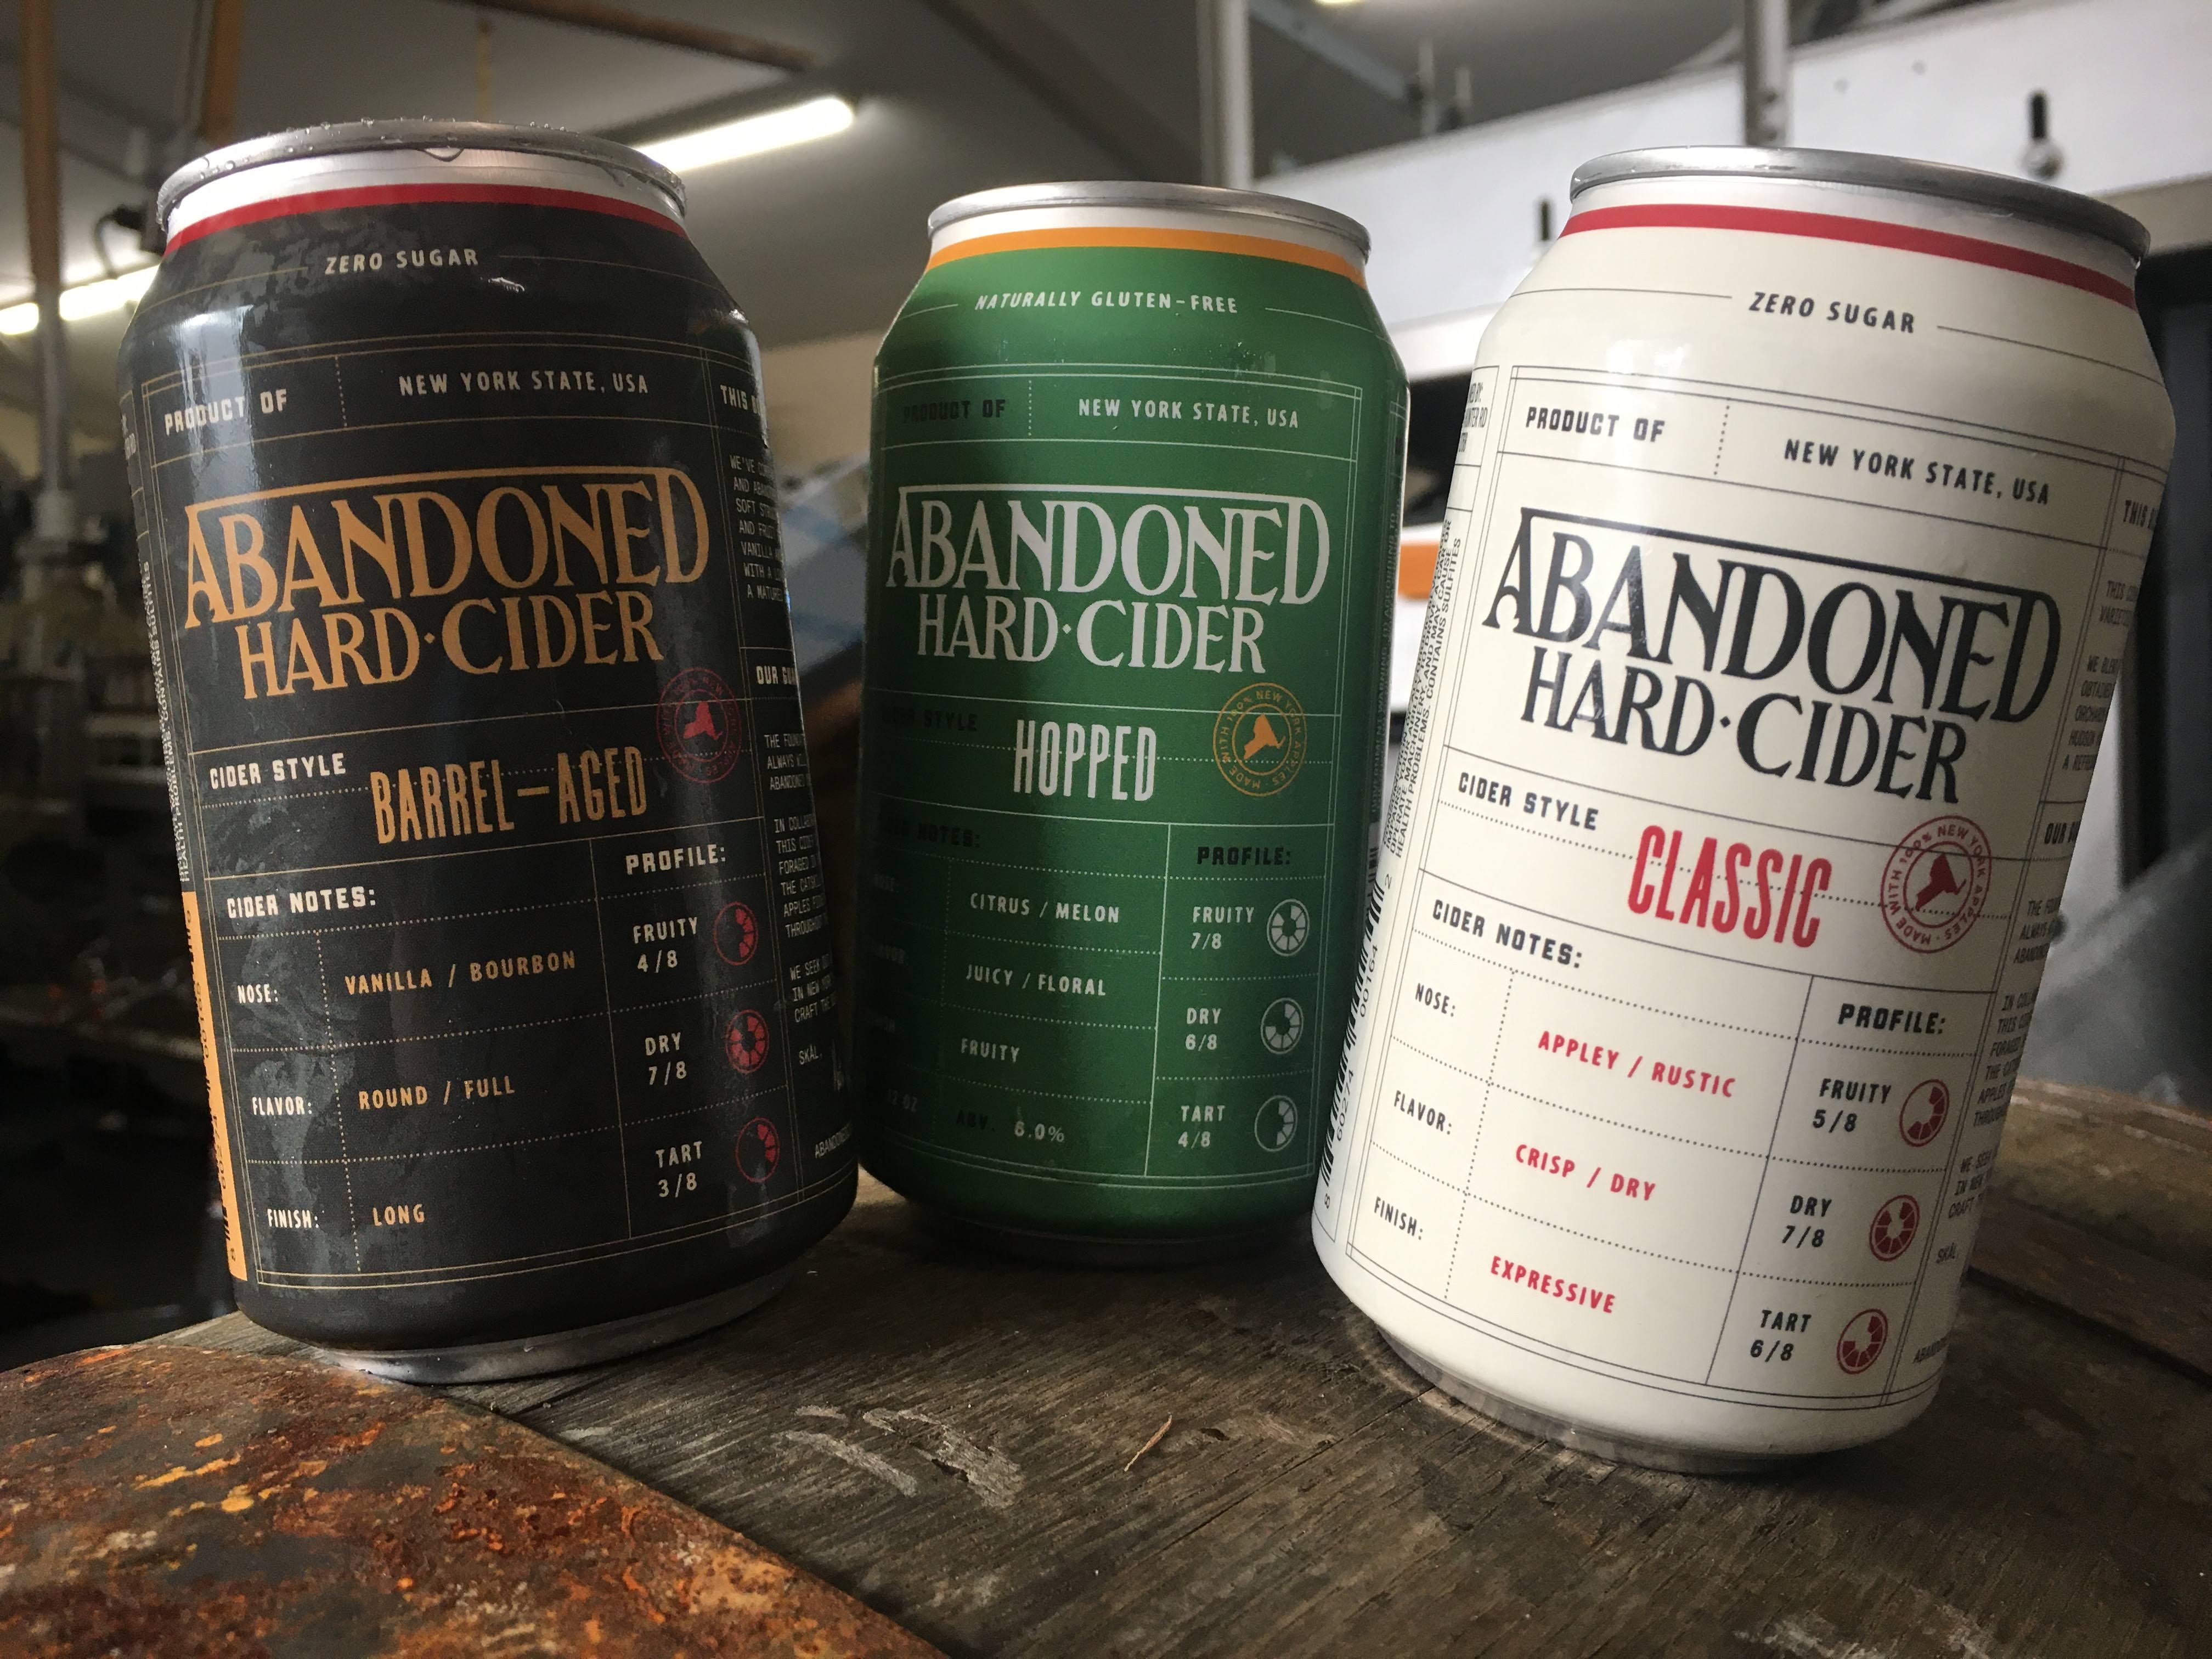 Three Abandoned Hard Cider cans showcasing different flavors.